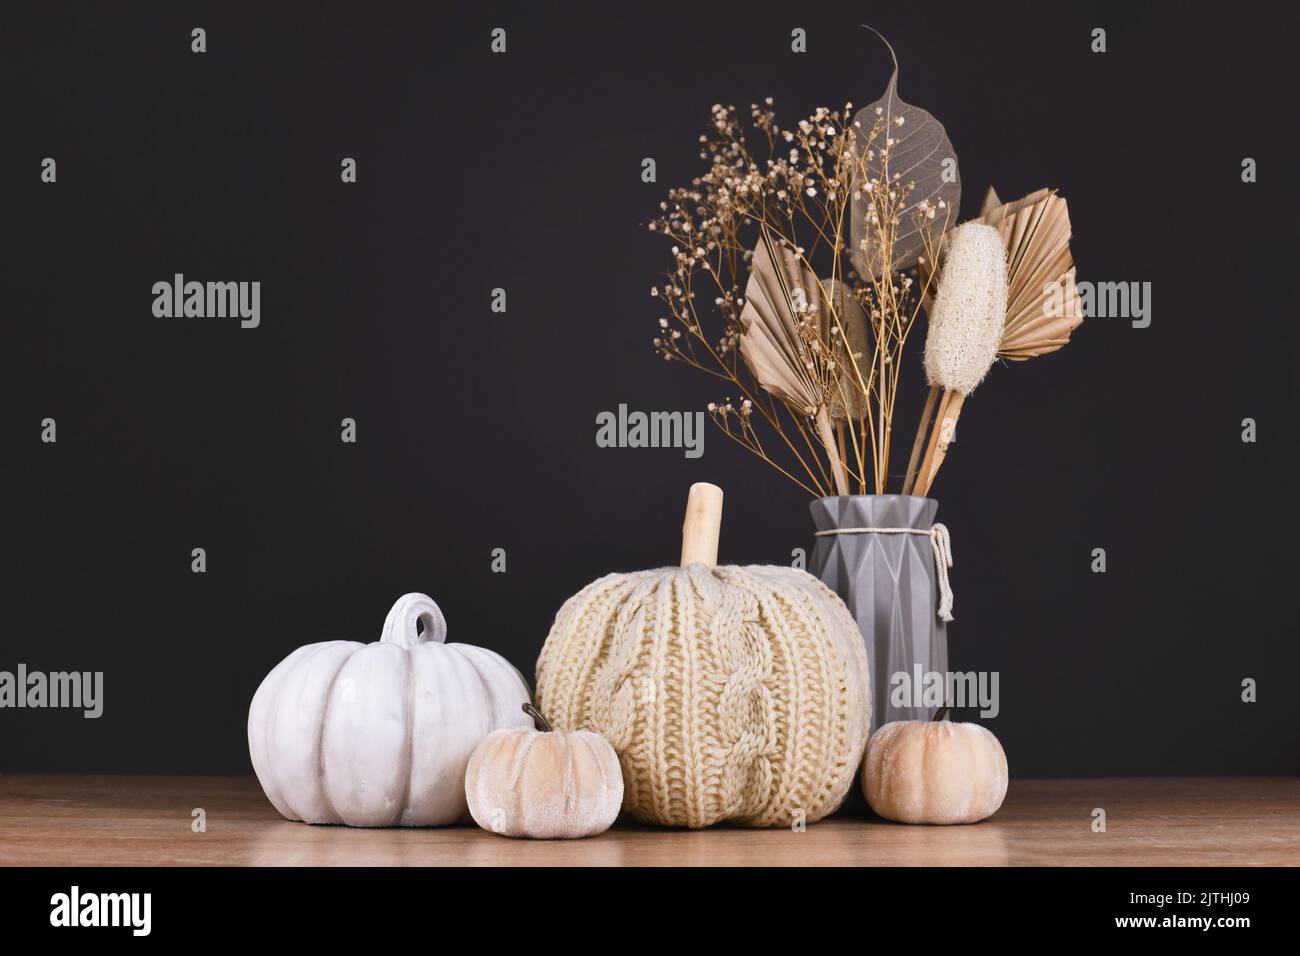 Autumn decoration with boho style knitted beige pumpkin and gray stone pumpkin on dark background Stock Photo